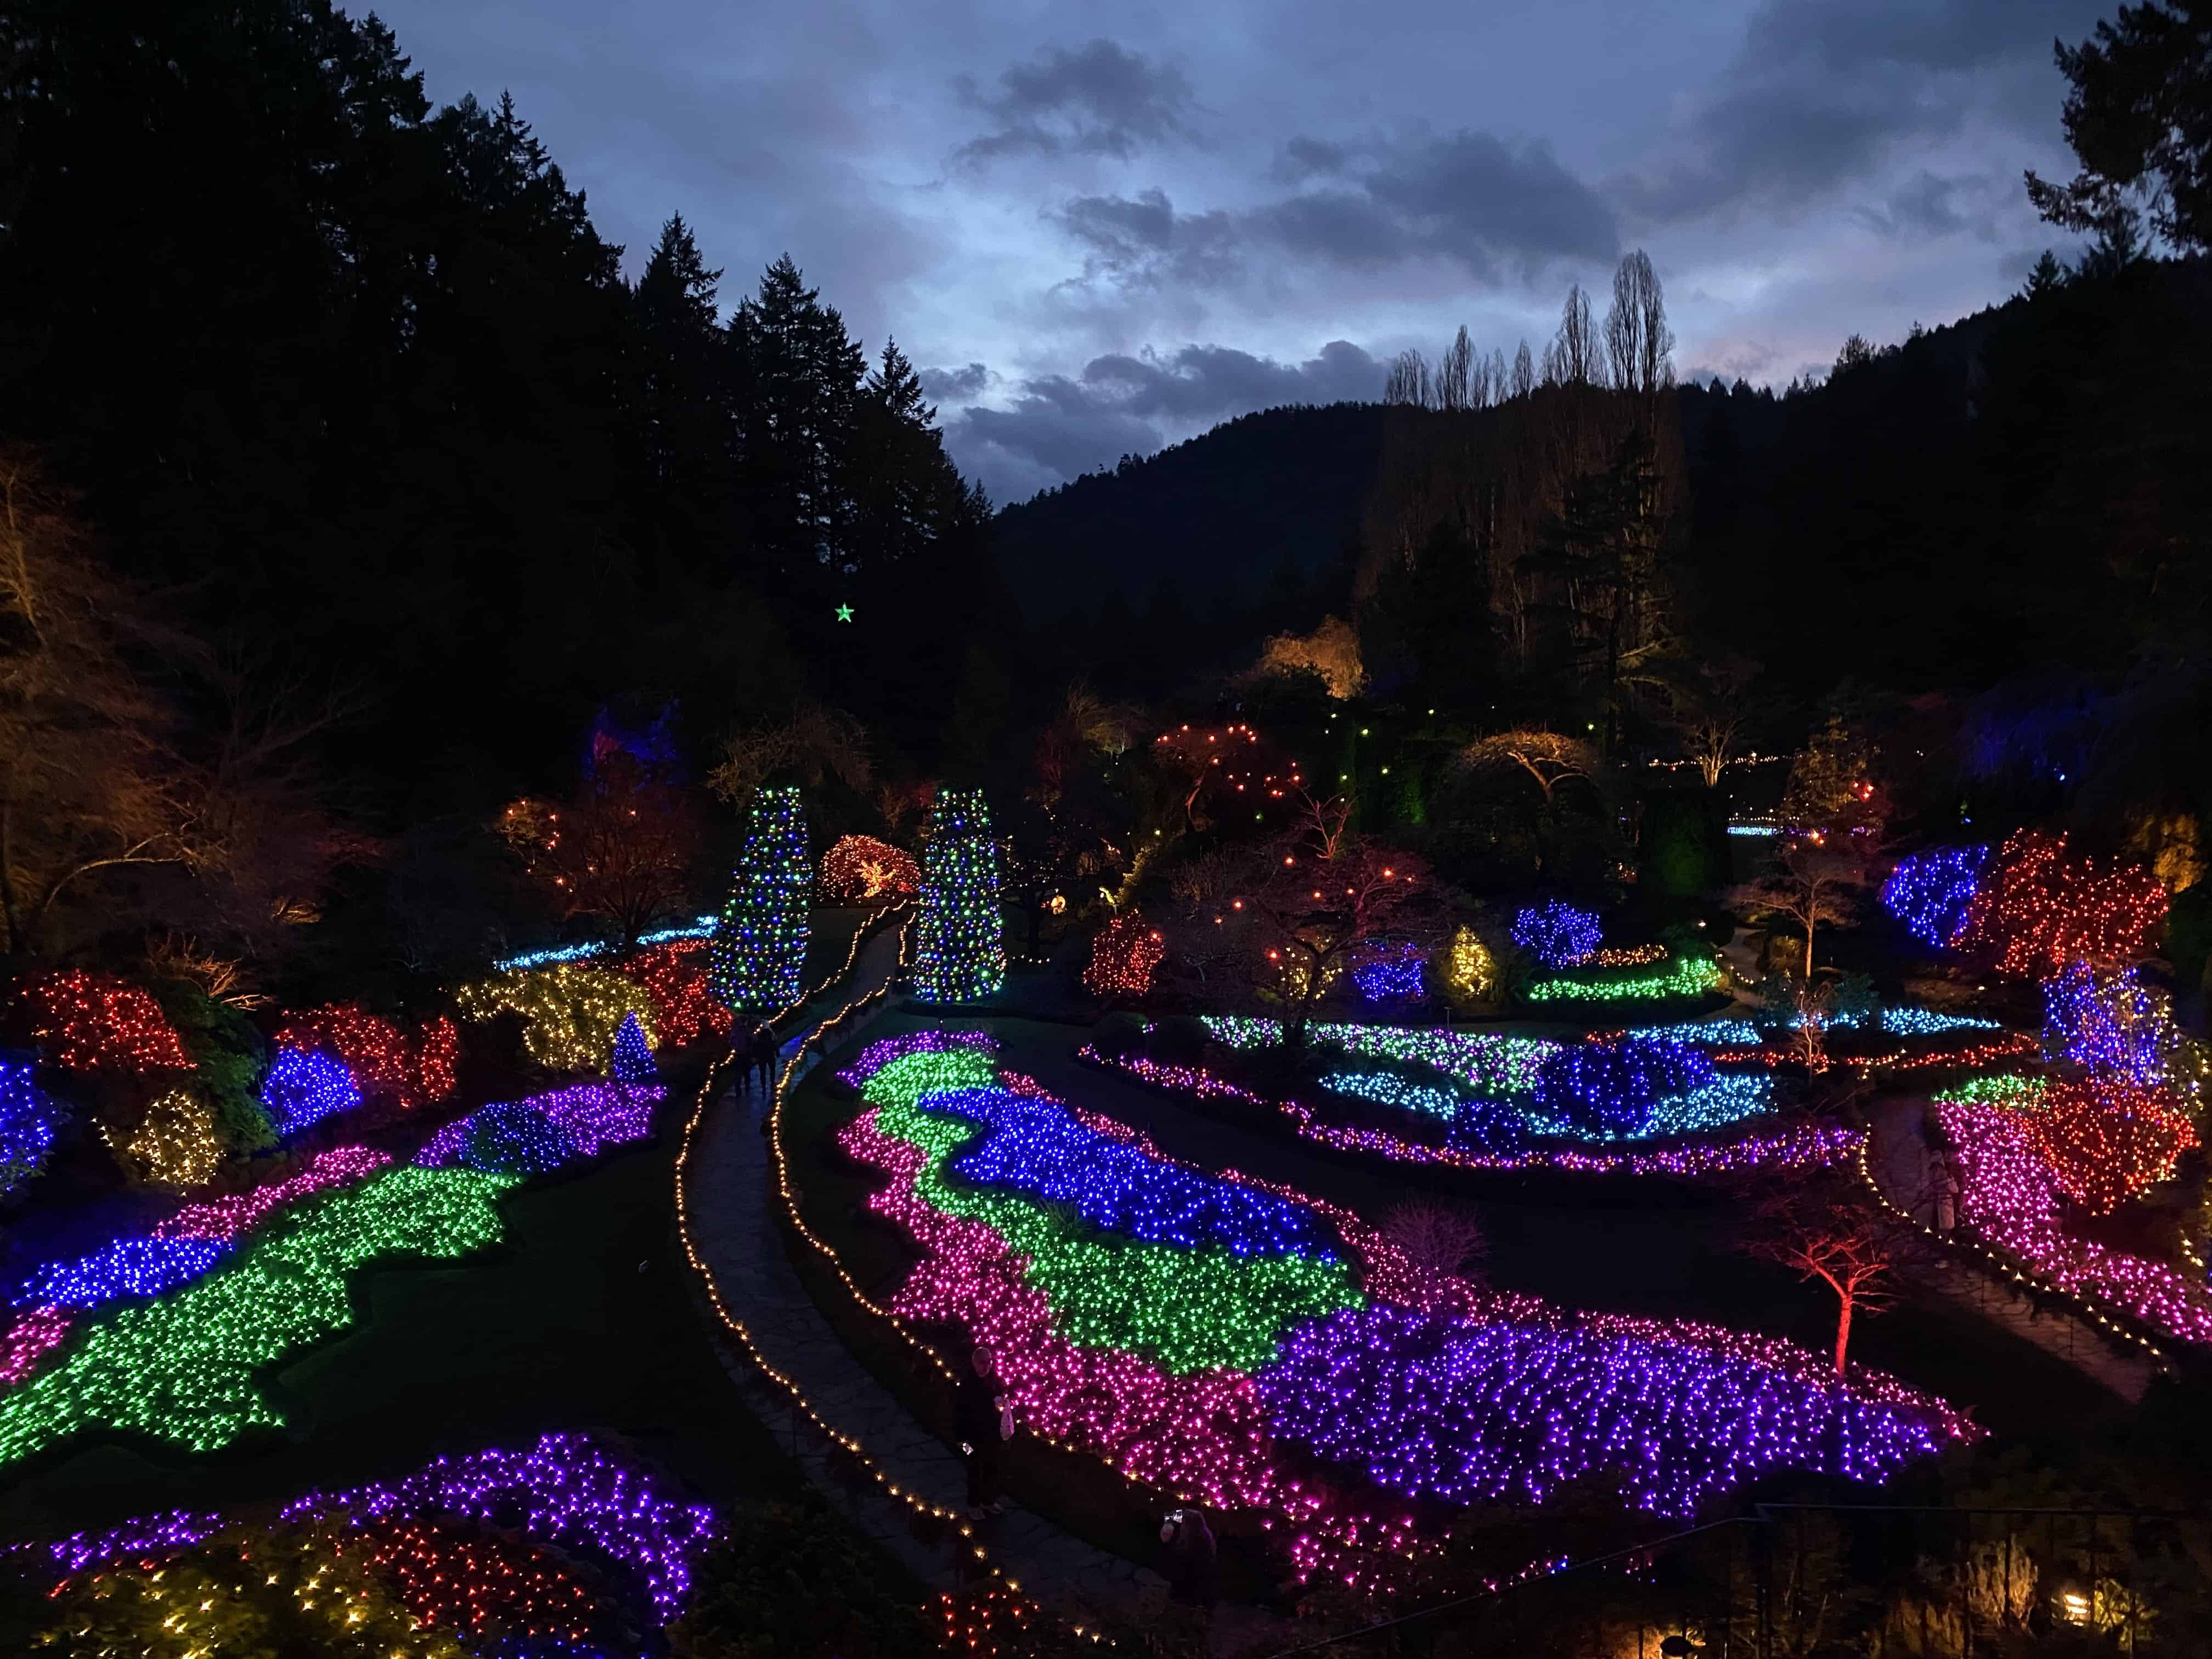 This picture shows the incredible pinks, blues, purples, greens and whites of the 12 days of Christmas light display at the Butchart Gardens. 